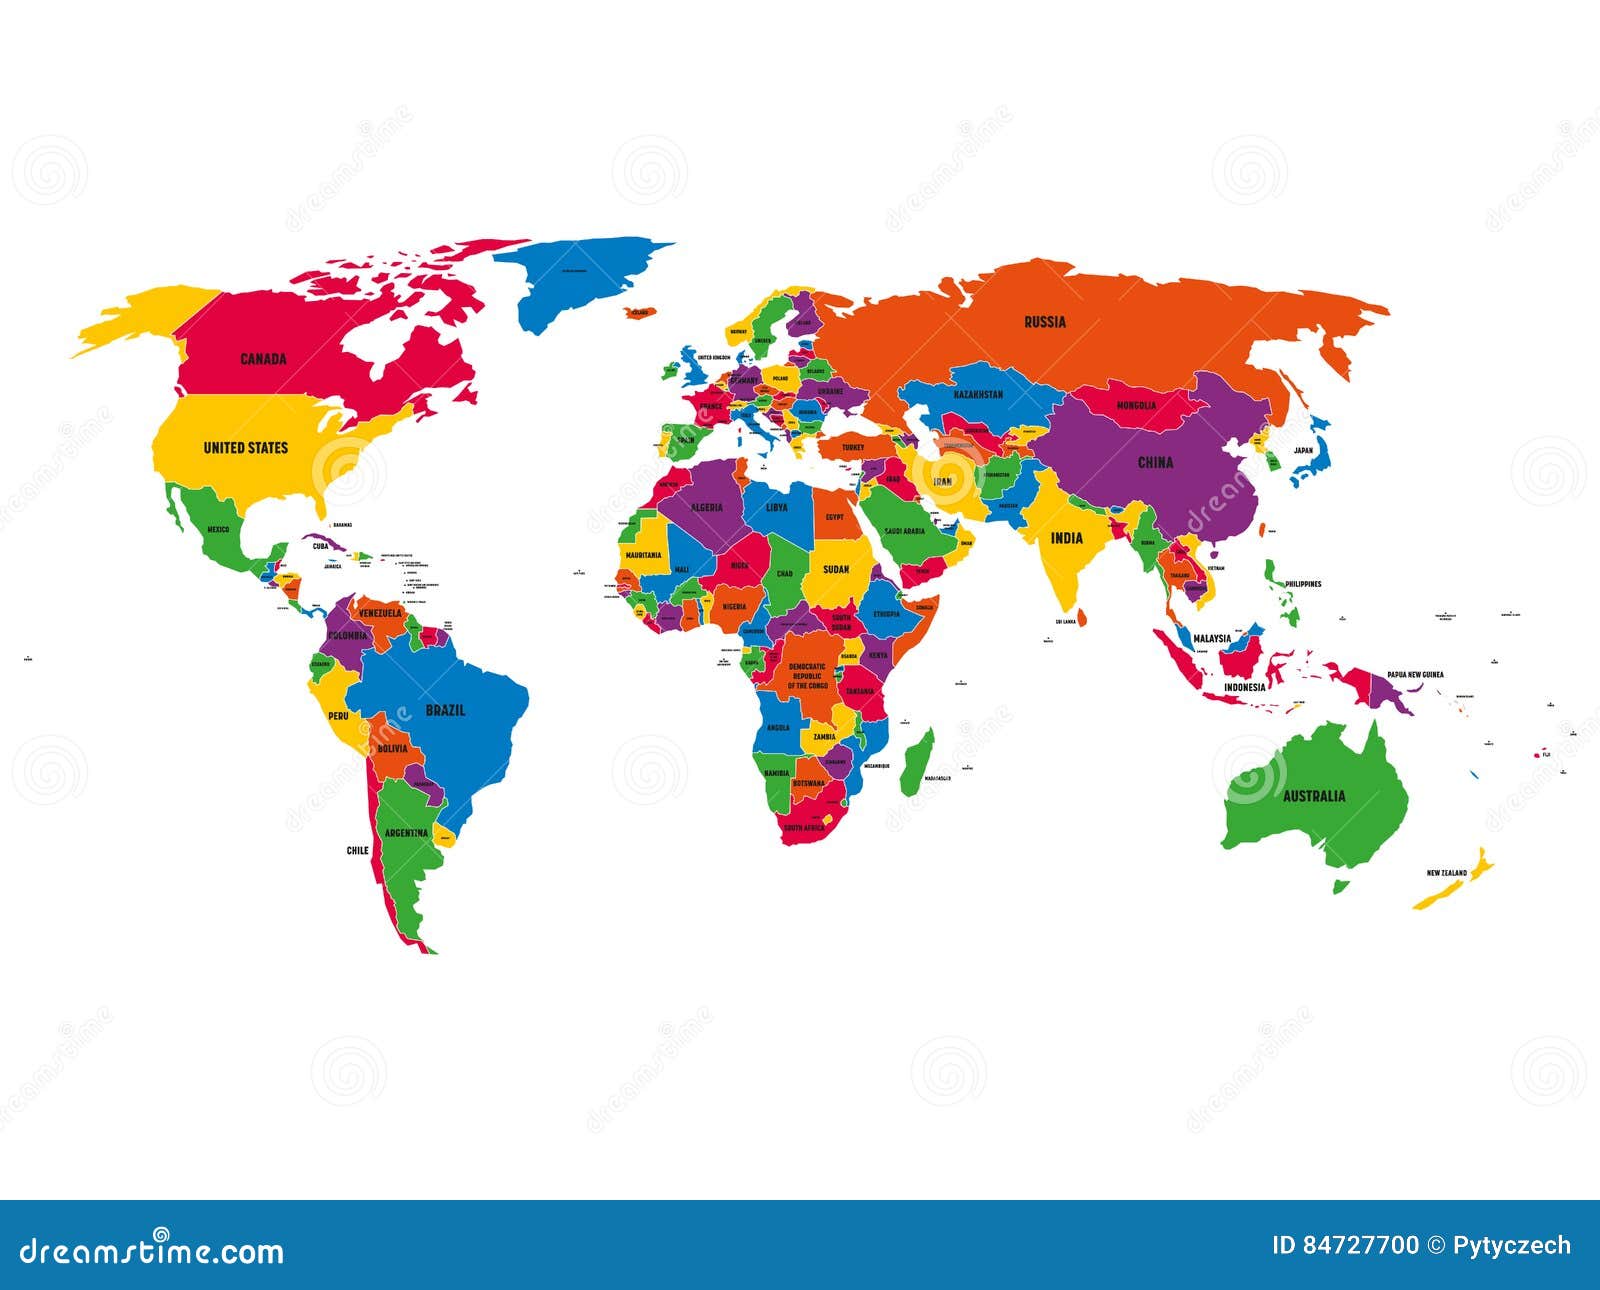 Multi-colored Political Vector Map of World with National Borders ...